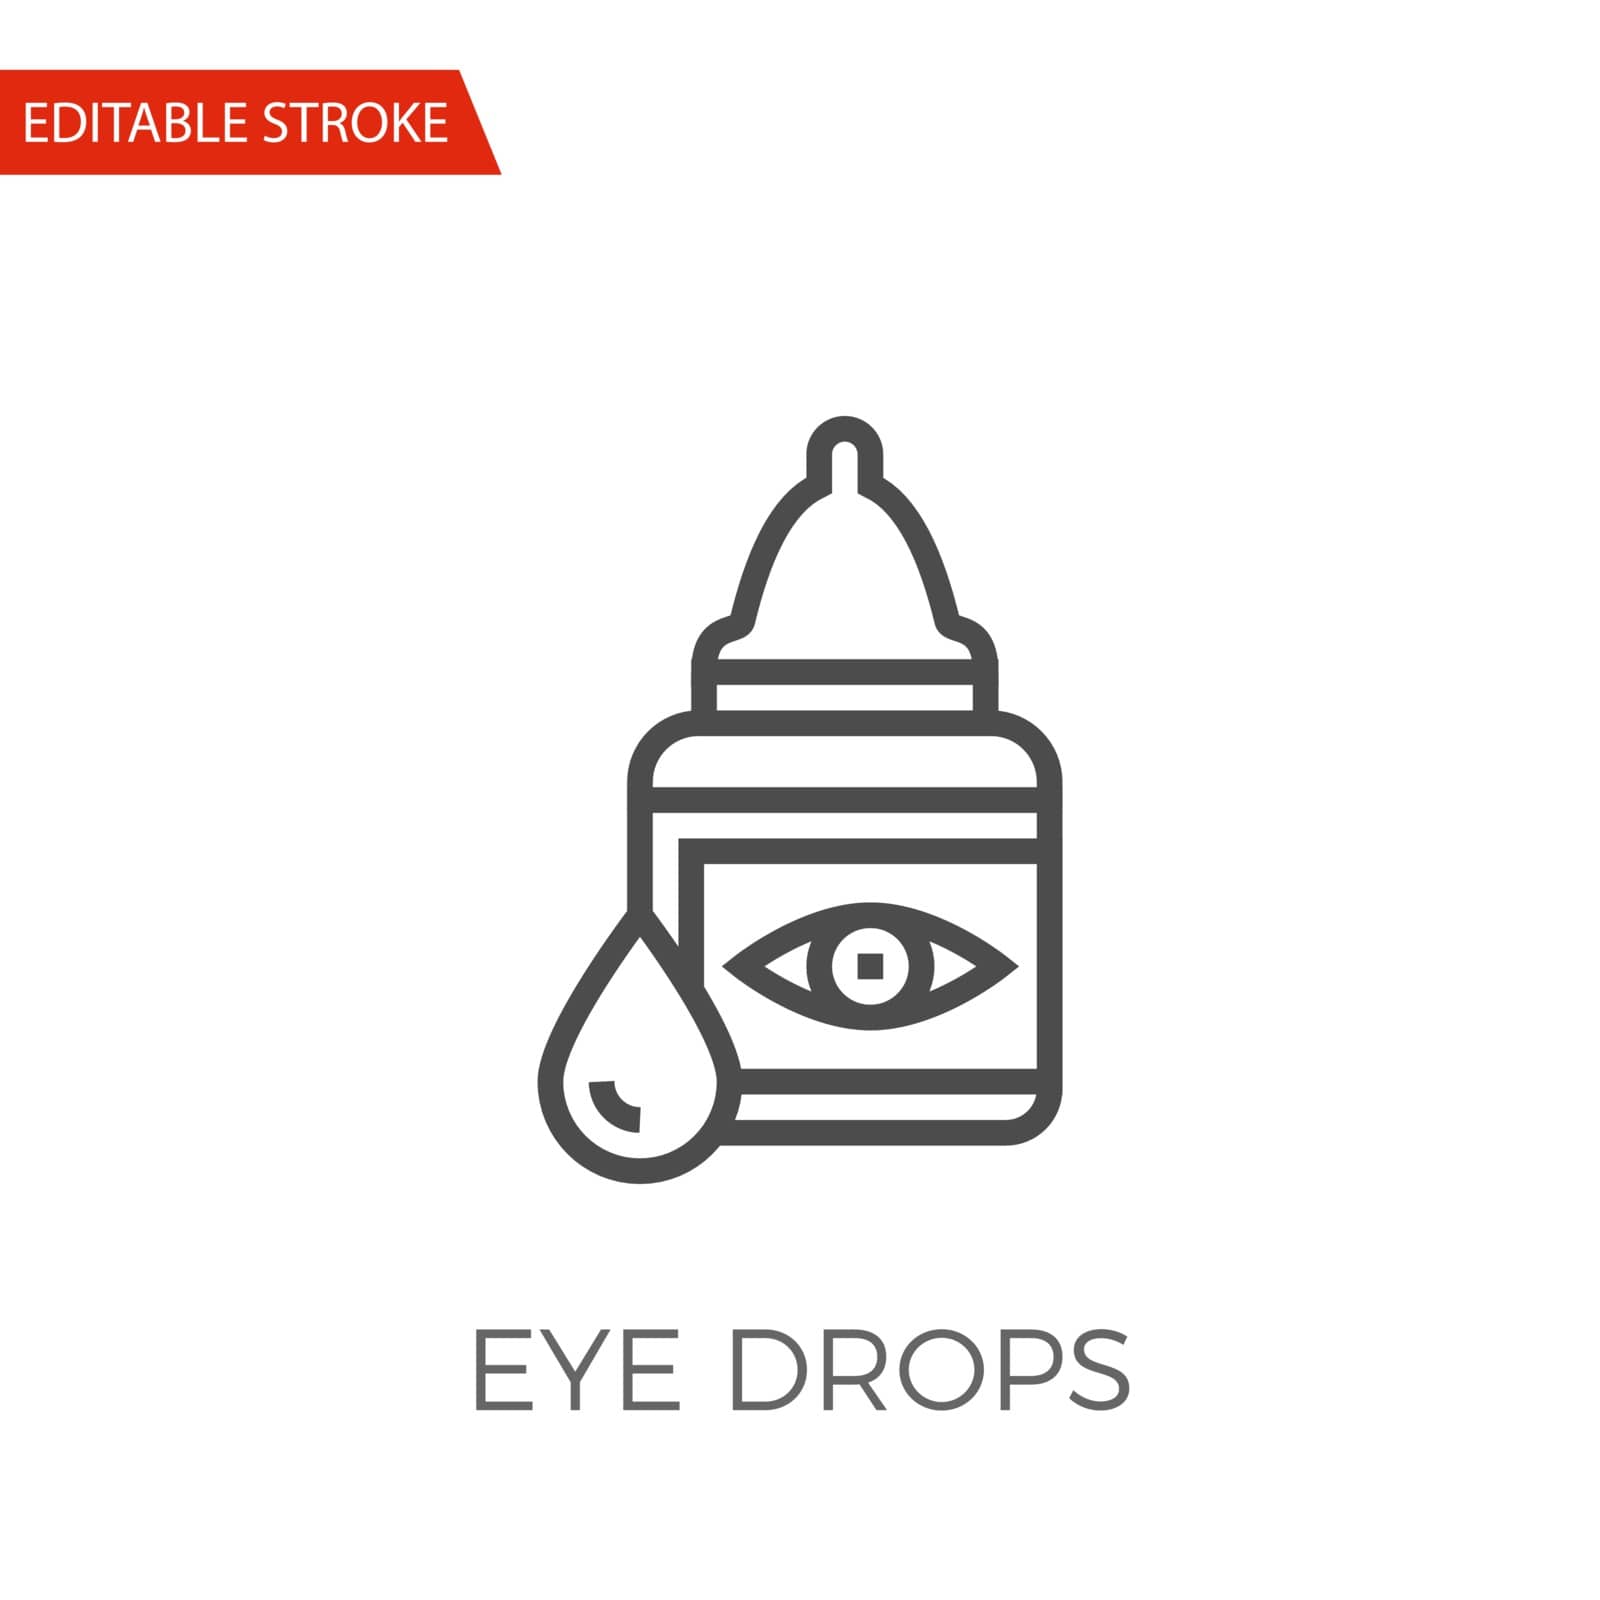 Eye Drops Thin Line Vector Icon. Flat Icon Isolated on the White Background. Editable Stroke EPS file. Vector illustration.